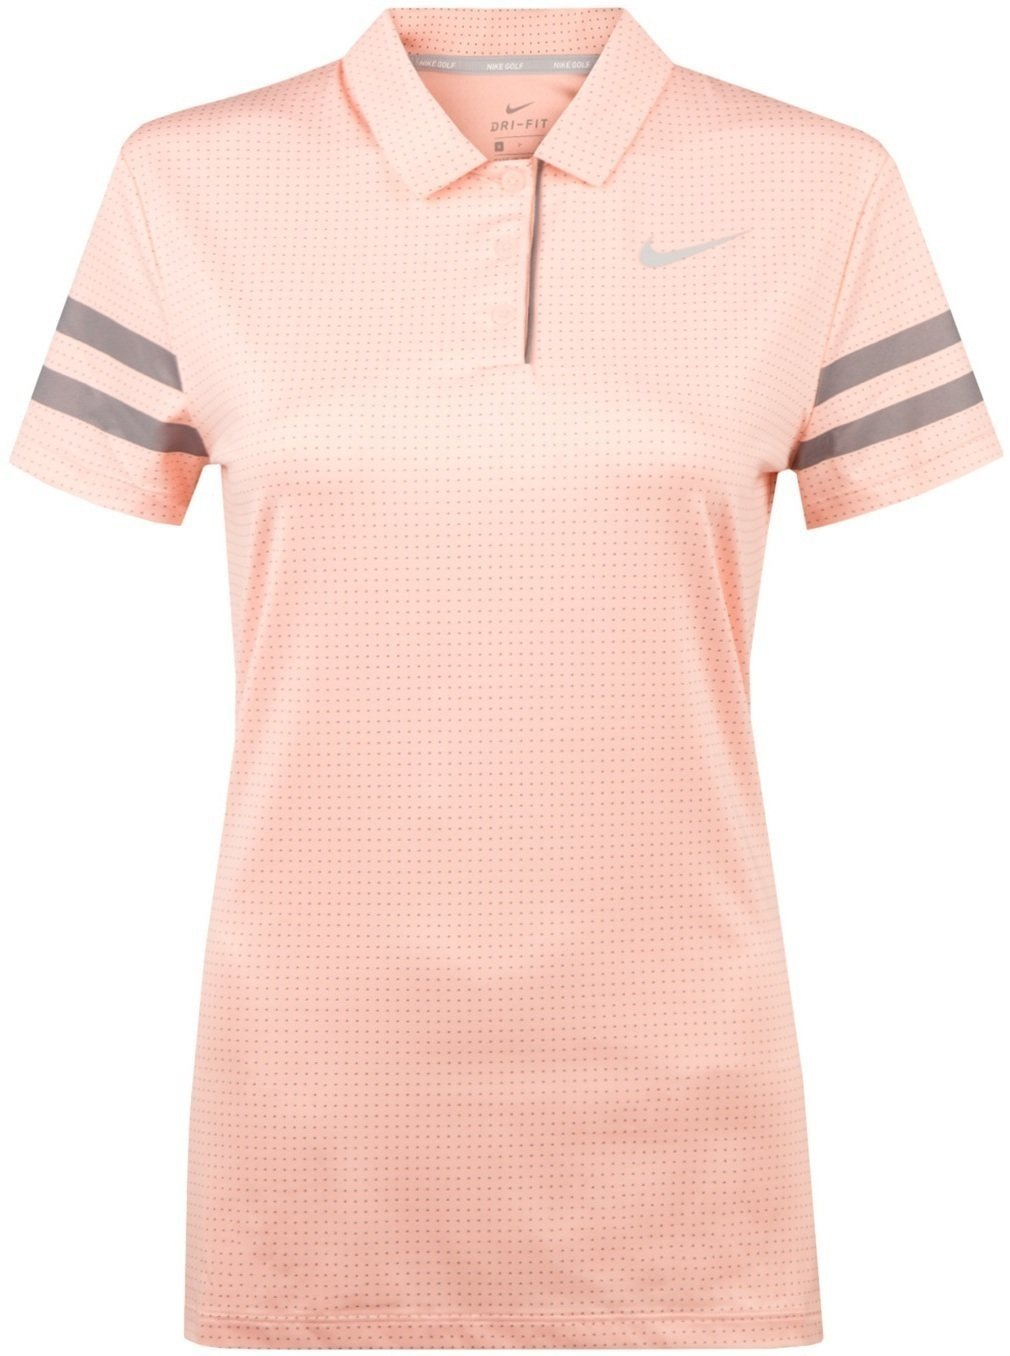 Polo trøje Nike Dri-Fit Printed Womens Polo Storm Pink/Anthracite/White S